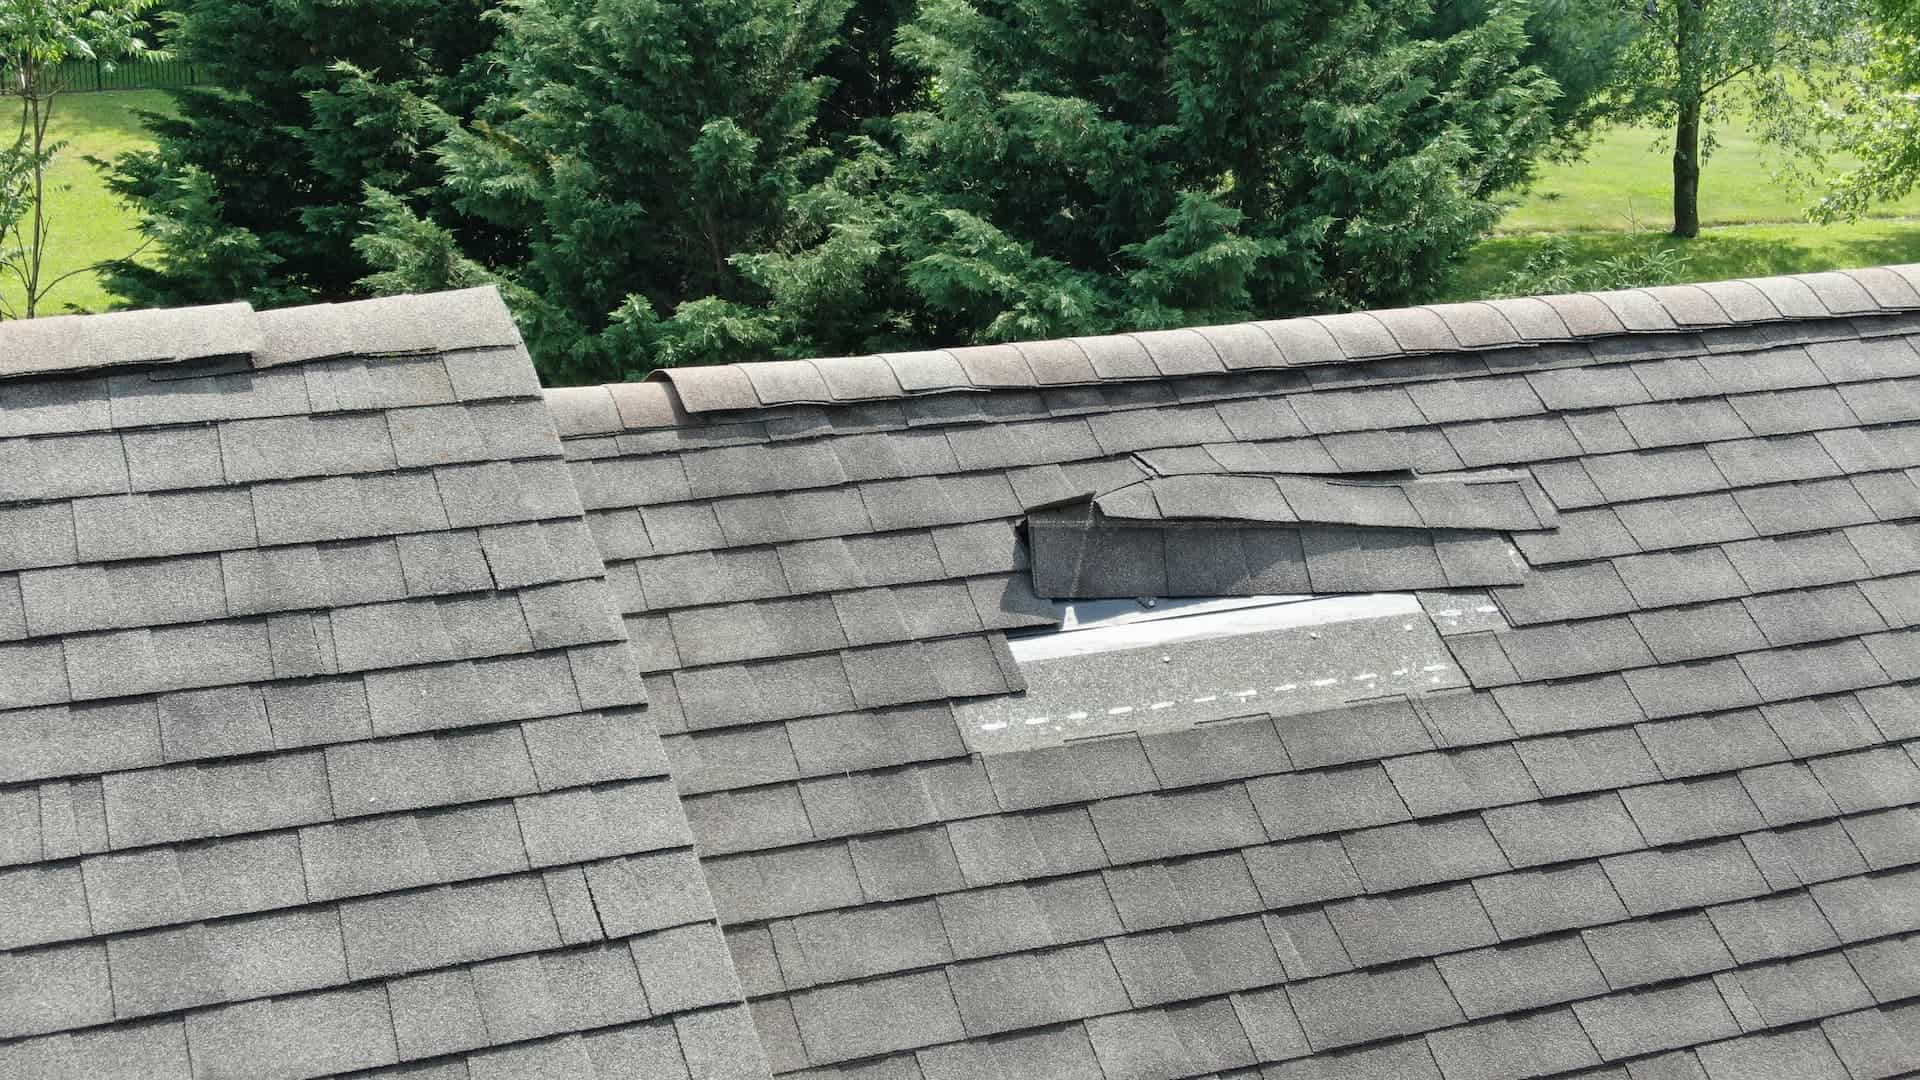 How to Repair Roof Shingles Blown Off: A Step-by-Step Guide